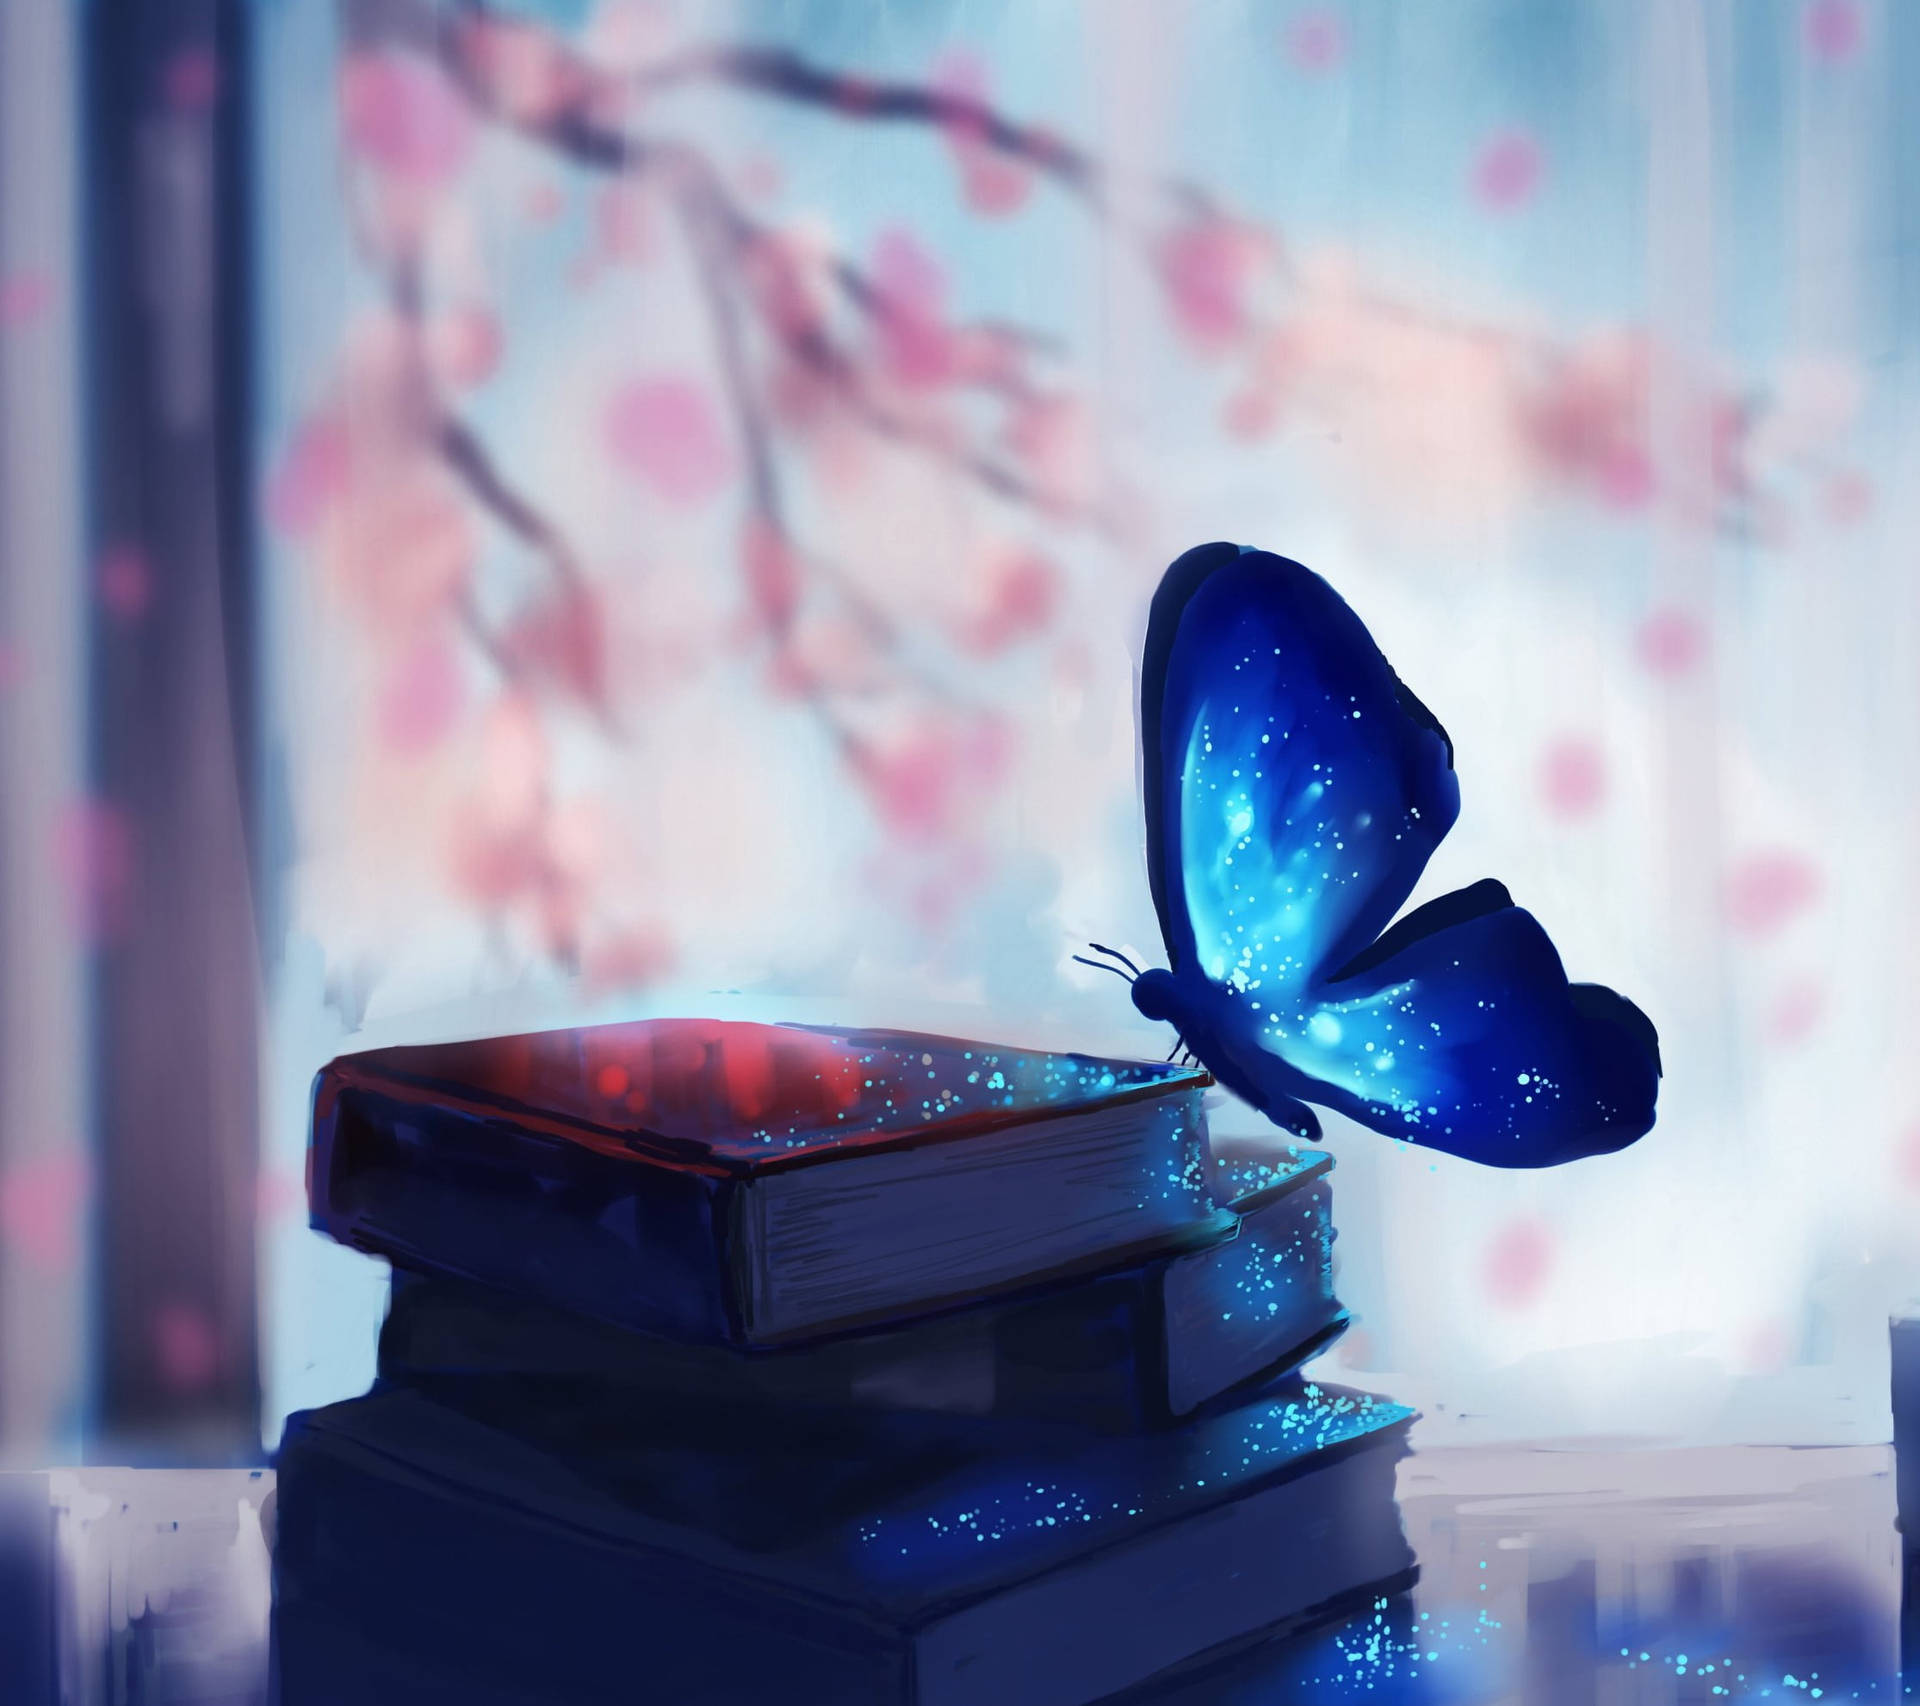 Butterfly On A Pile Of Books